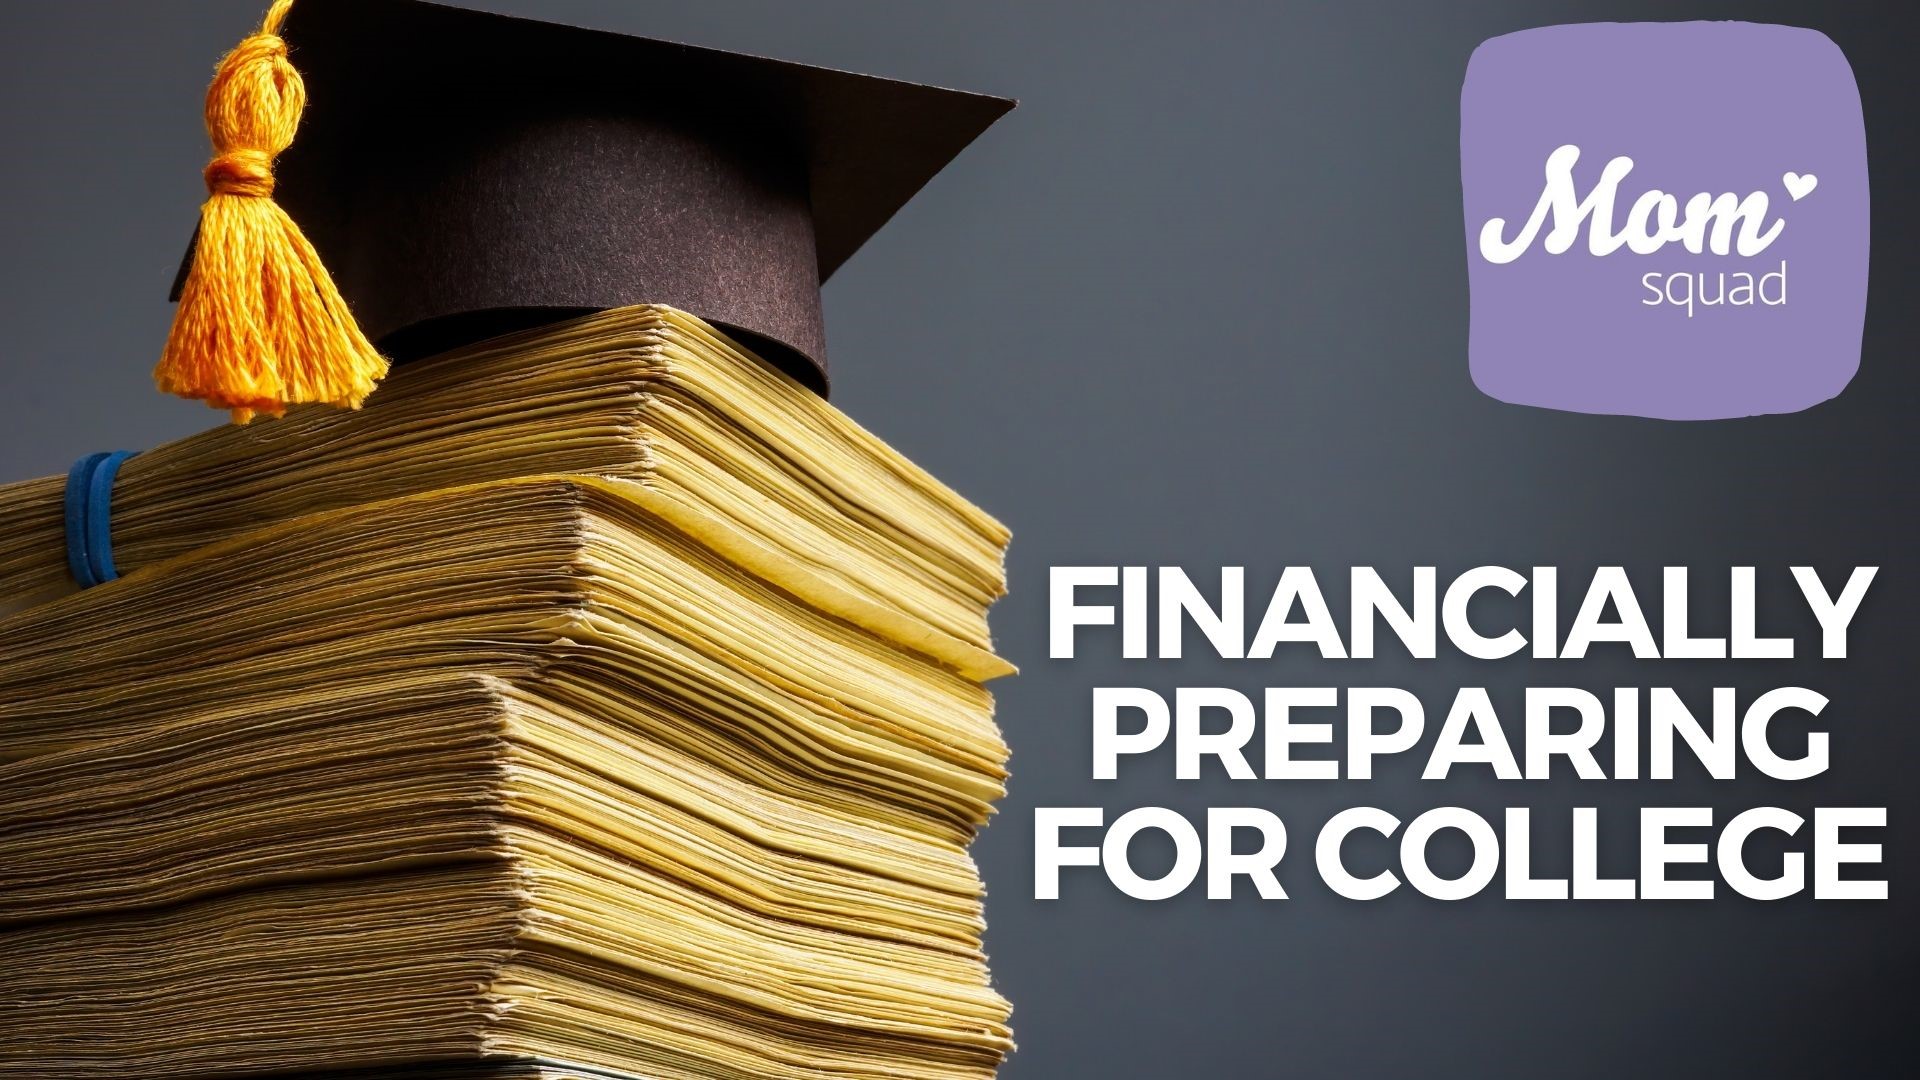 Maureen Kyle talks with a financial literacy professor on how to best prepare students financially for college, as well as how to tackle budgets and loans.